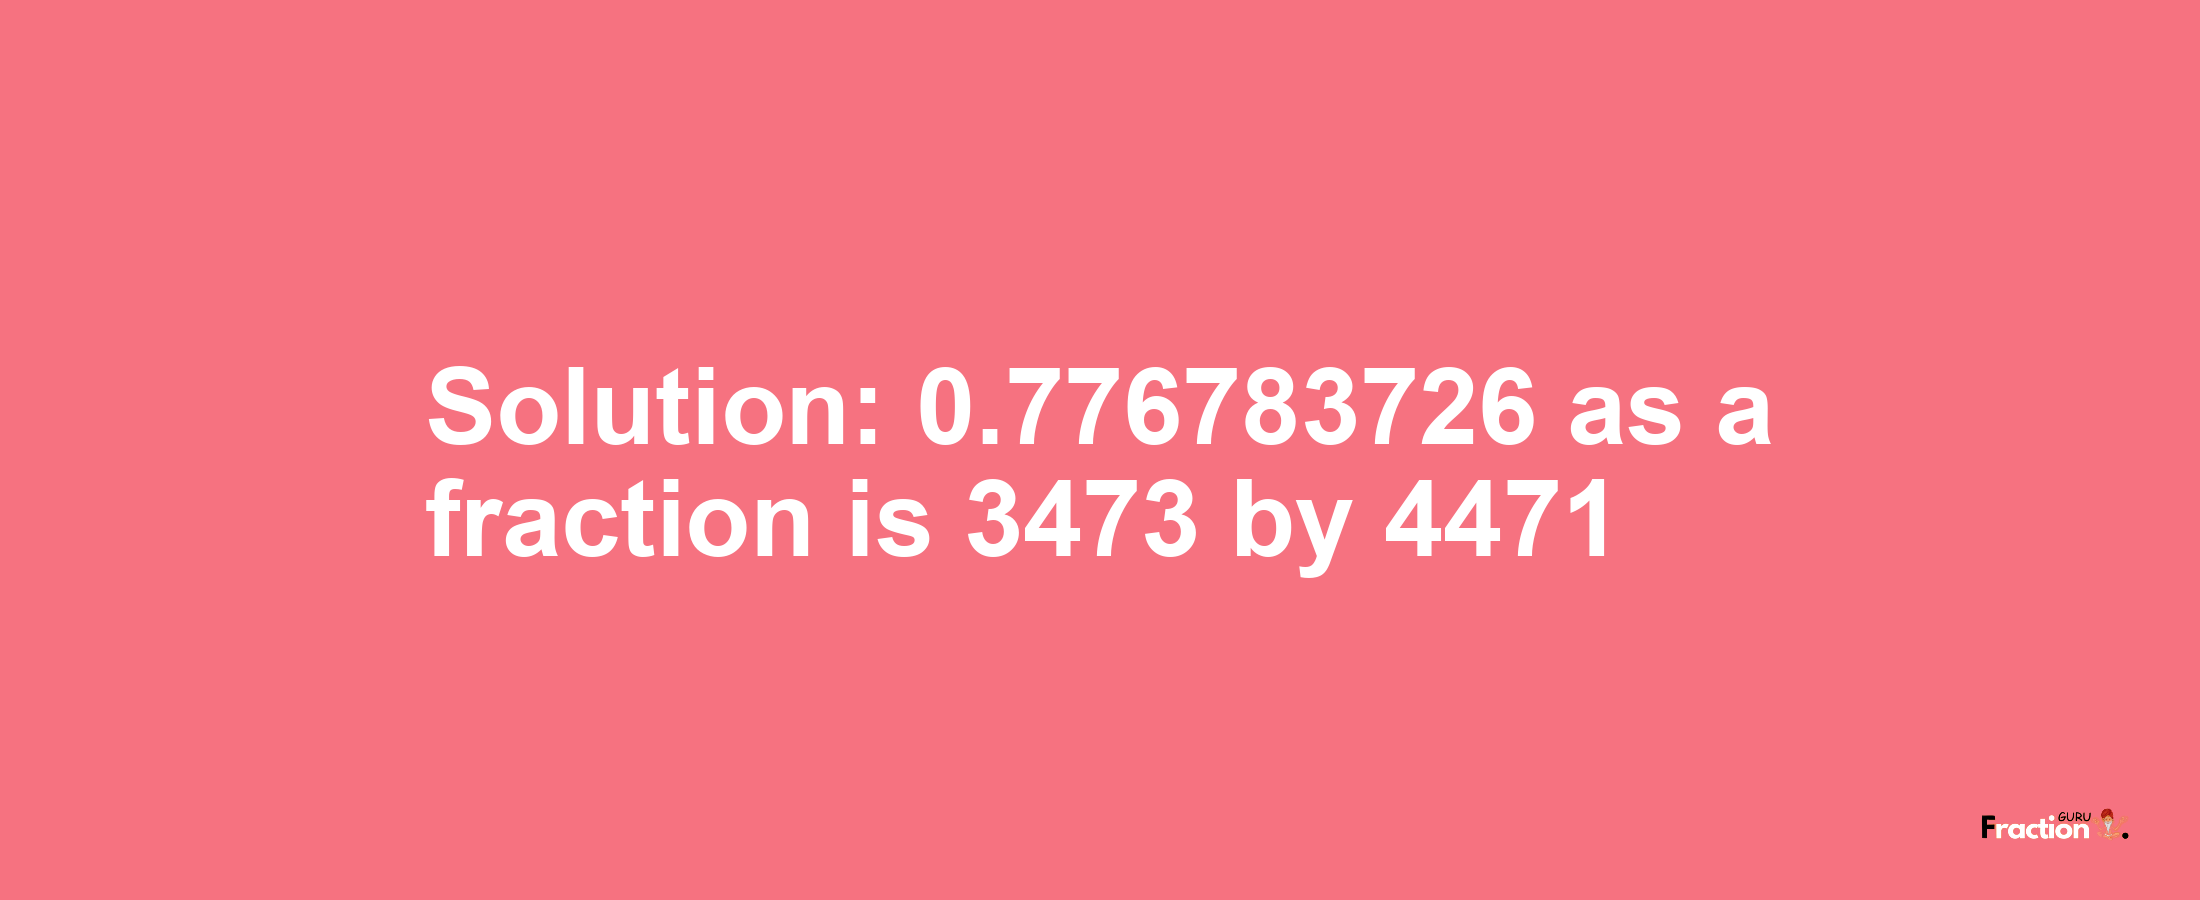 Solution:0.776783726 as a fraction is 3473/4471